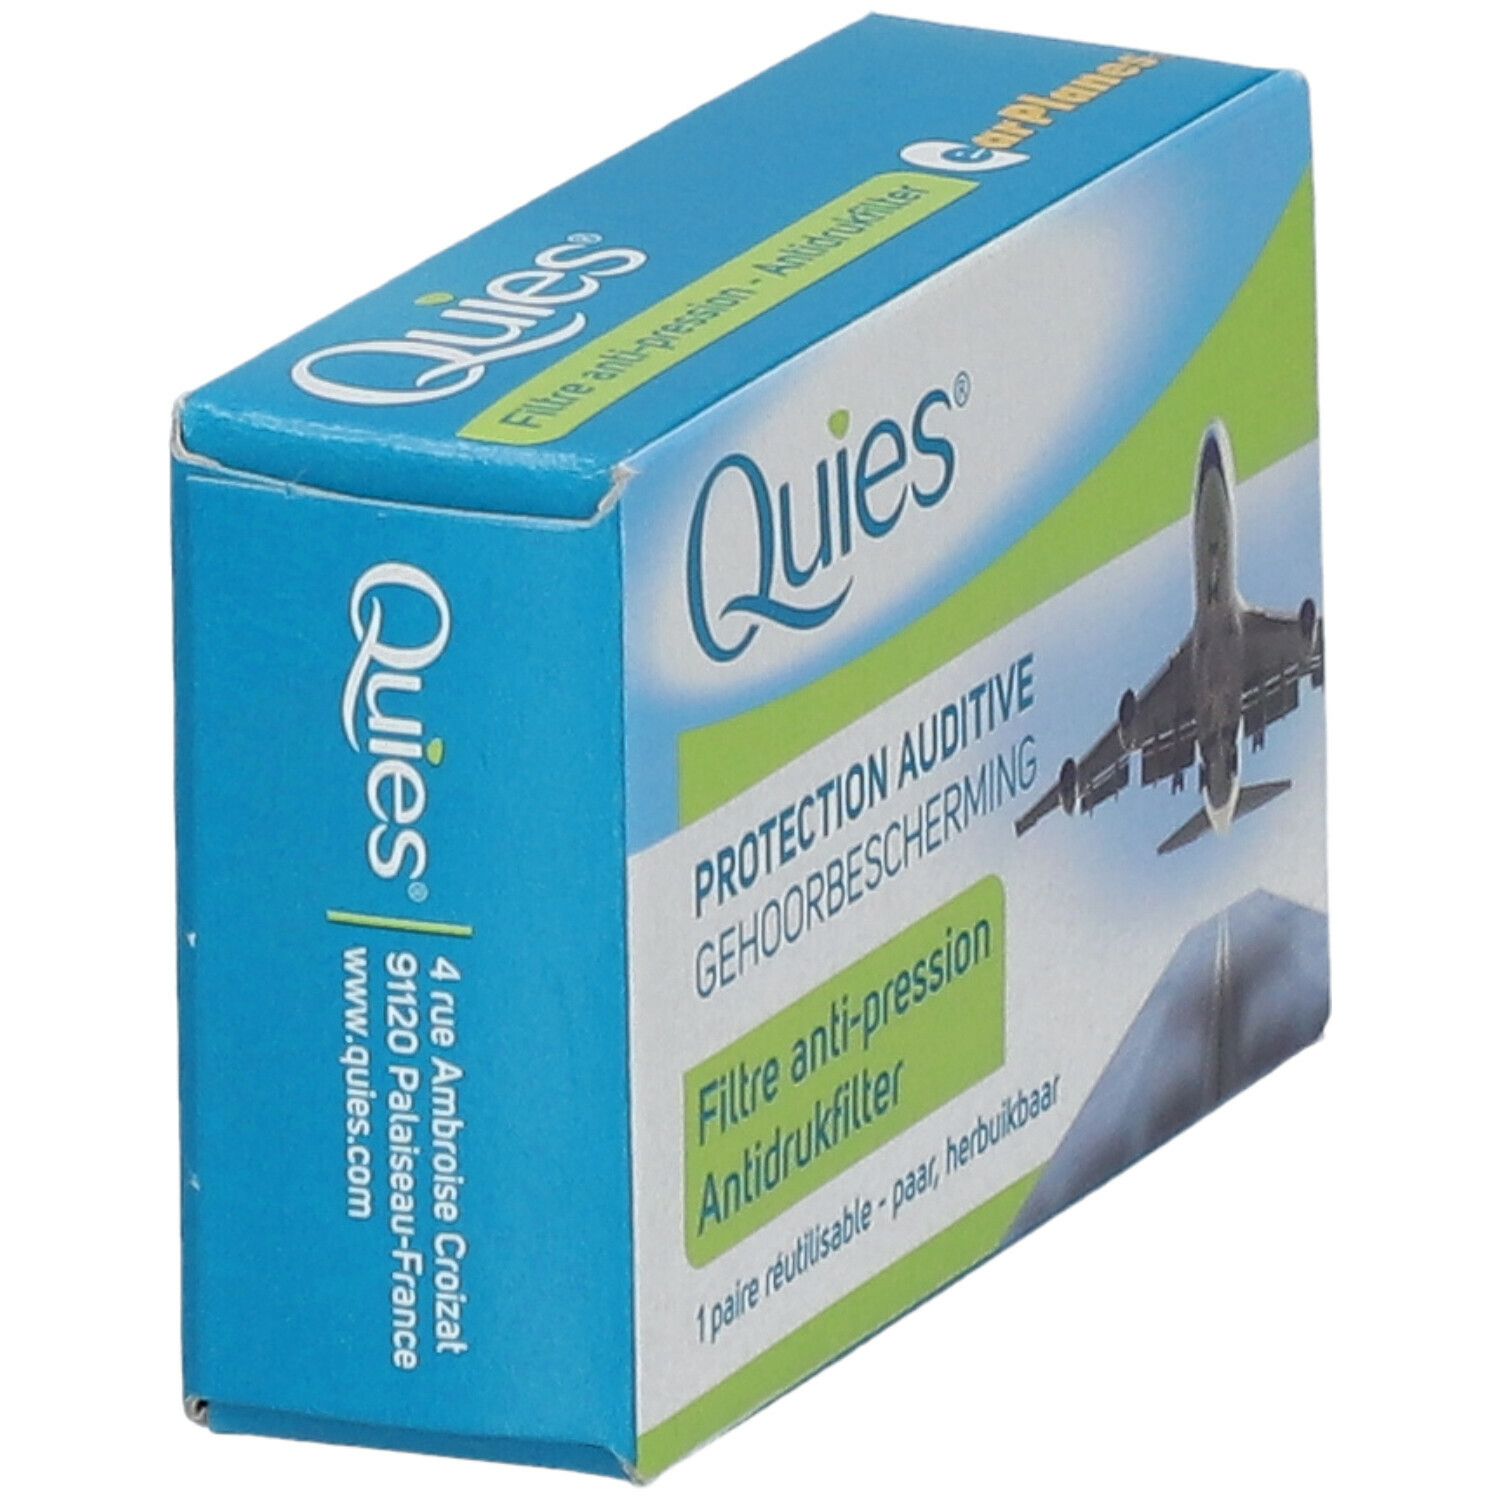 Quies earplanes bouchons auriculaire adultes 2 pc(s) - Redcare Pharmacie